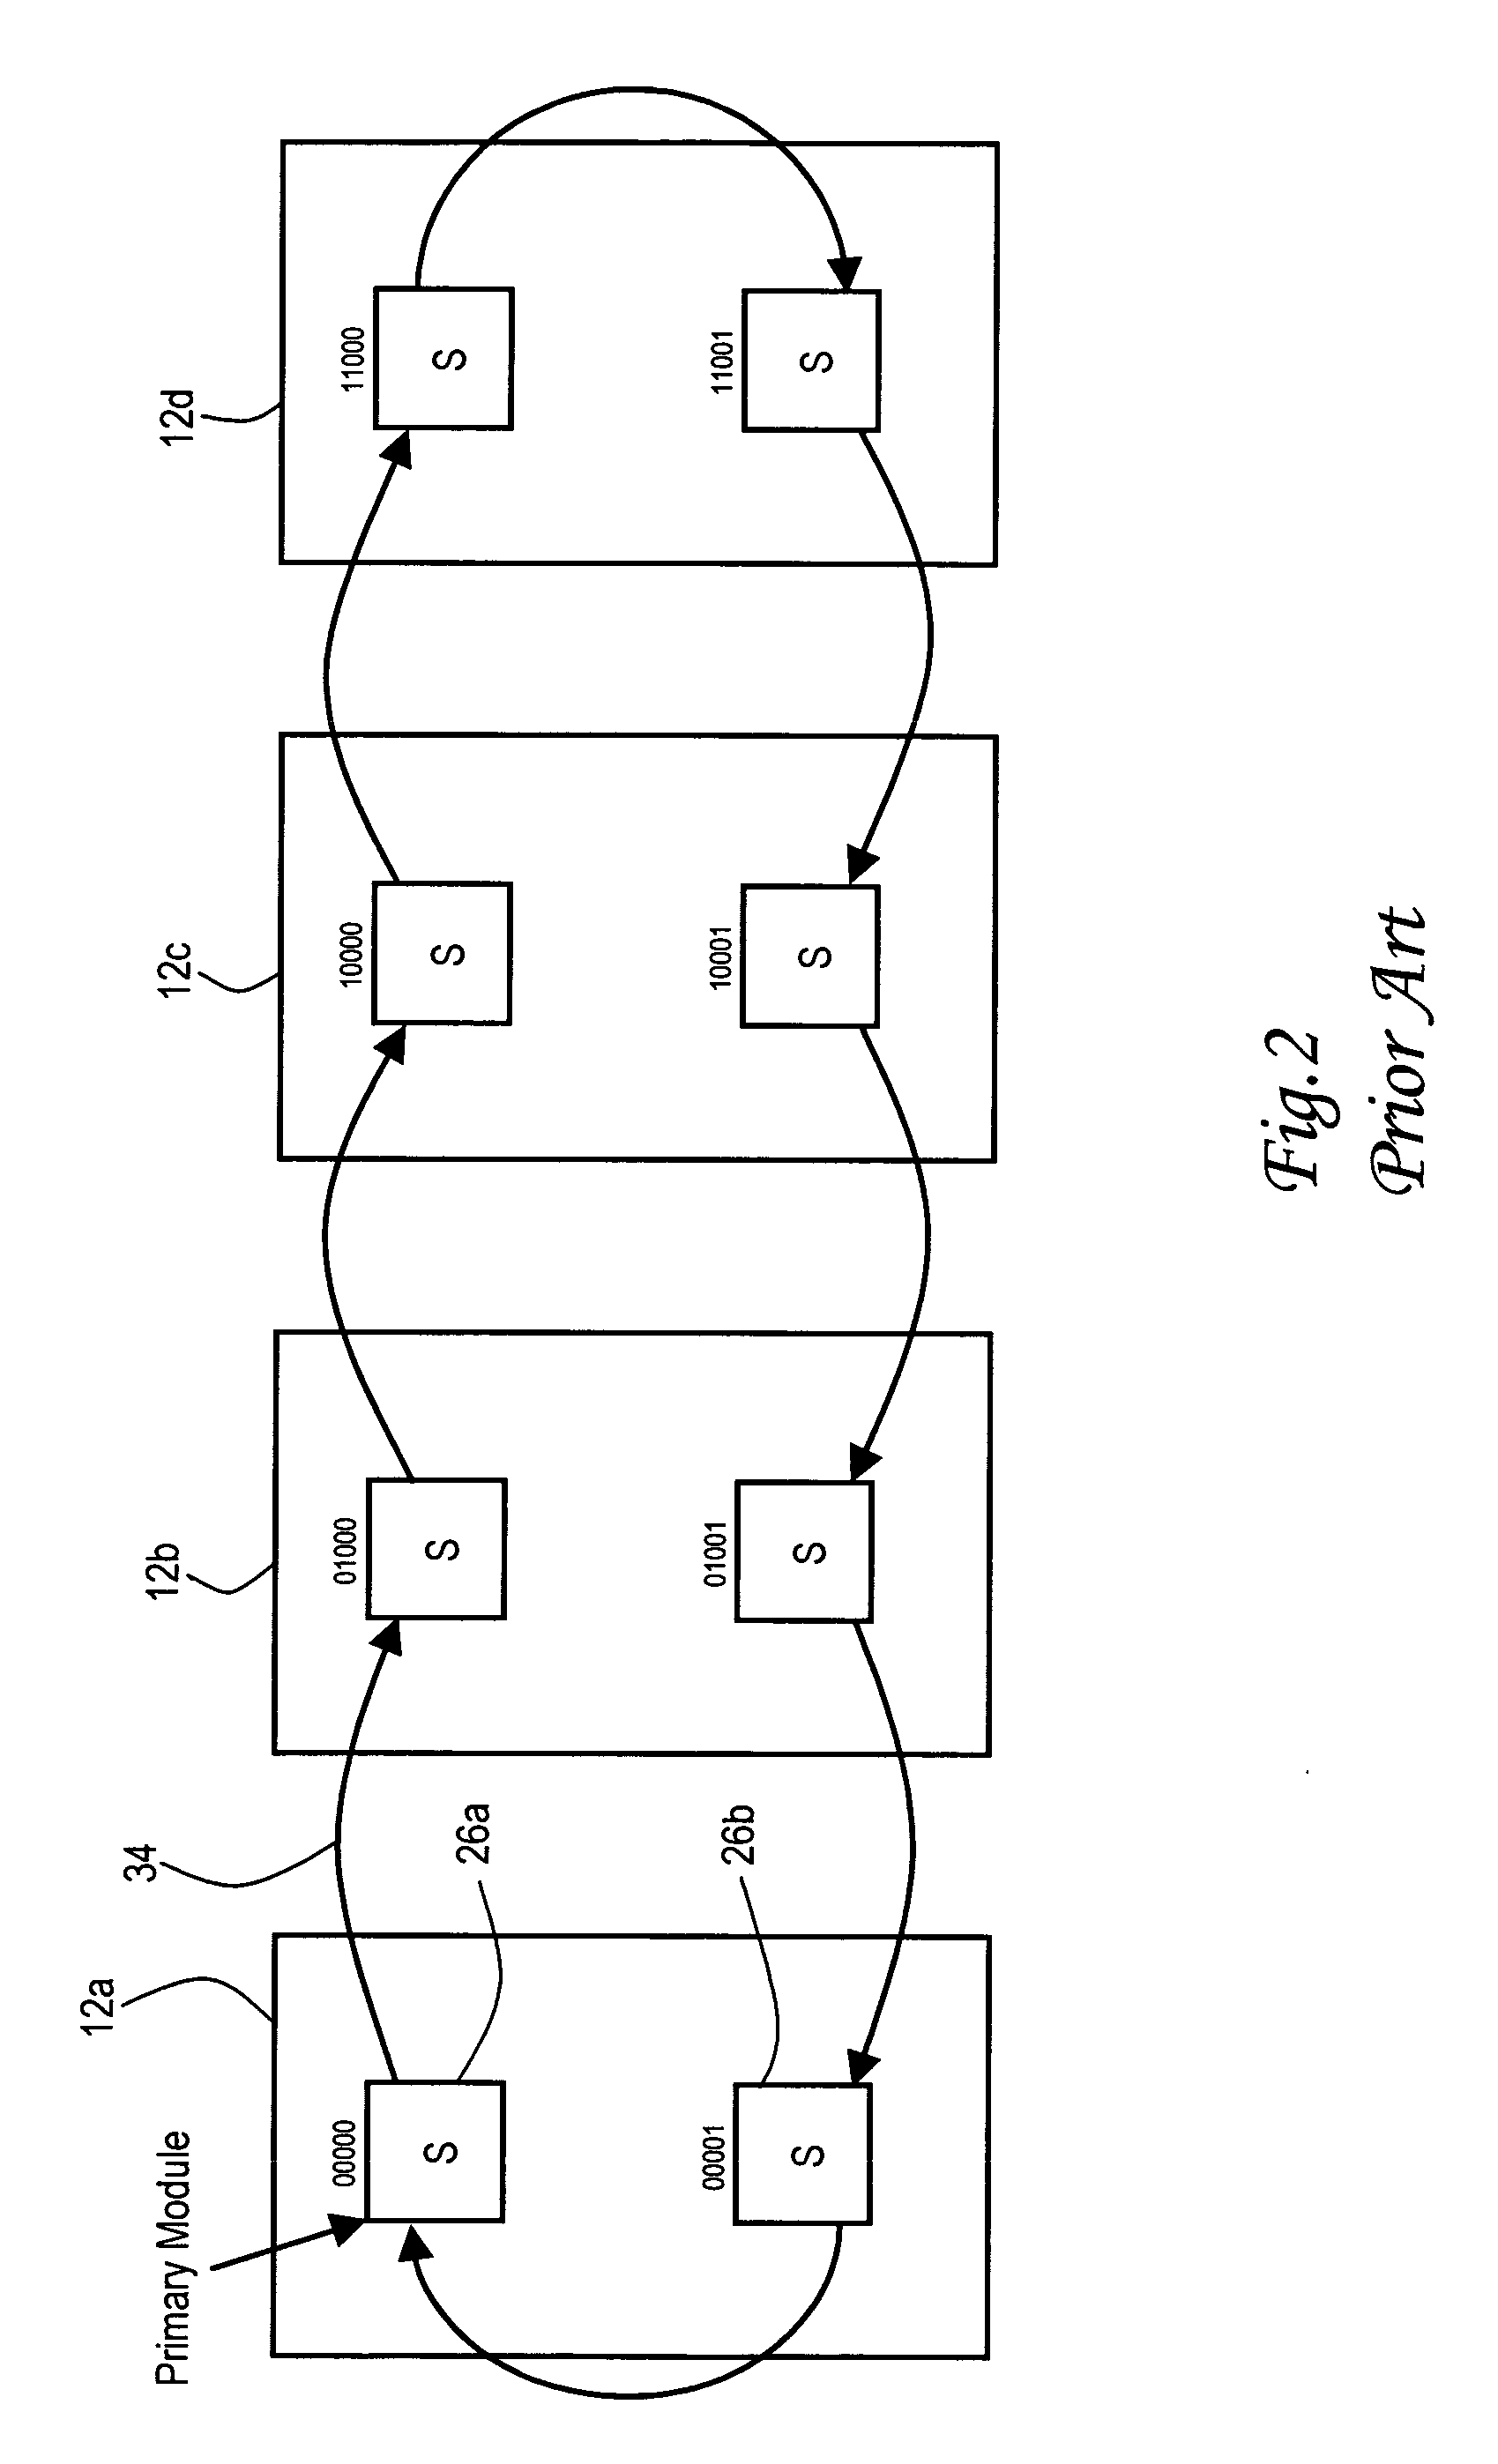 Mechanism for FRU fault isolation in distributed nodal environment